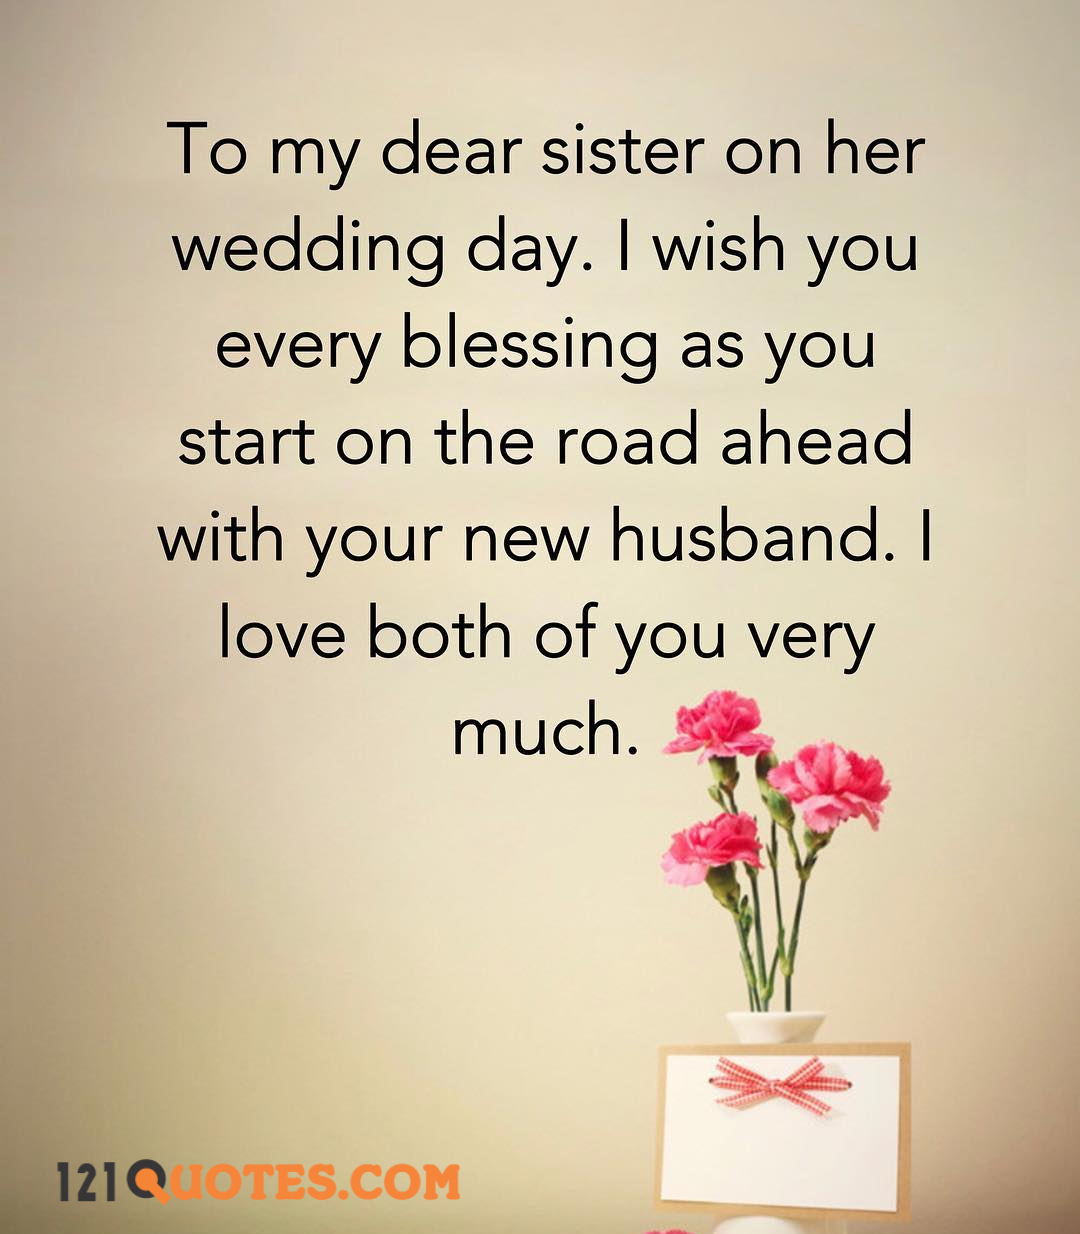 wedding wishes for sister 4k photo